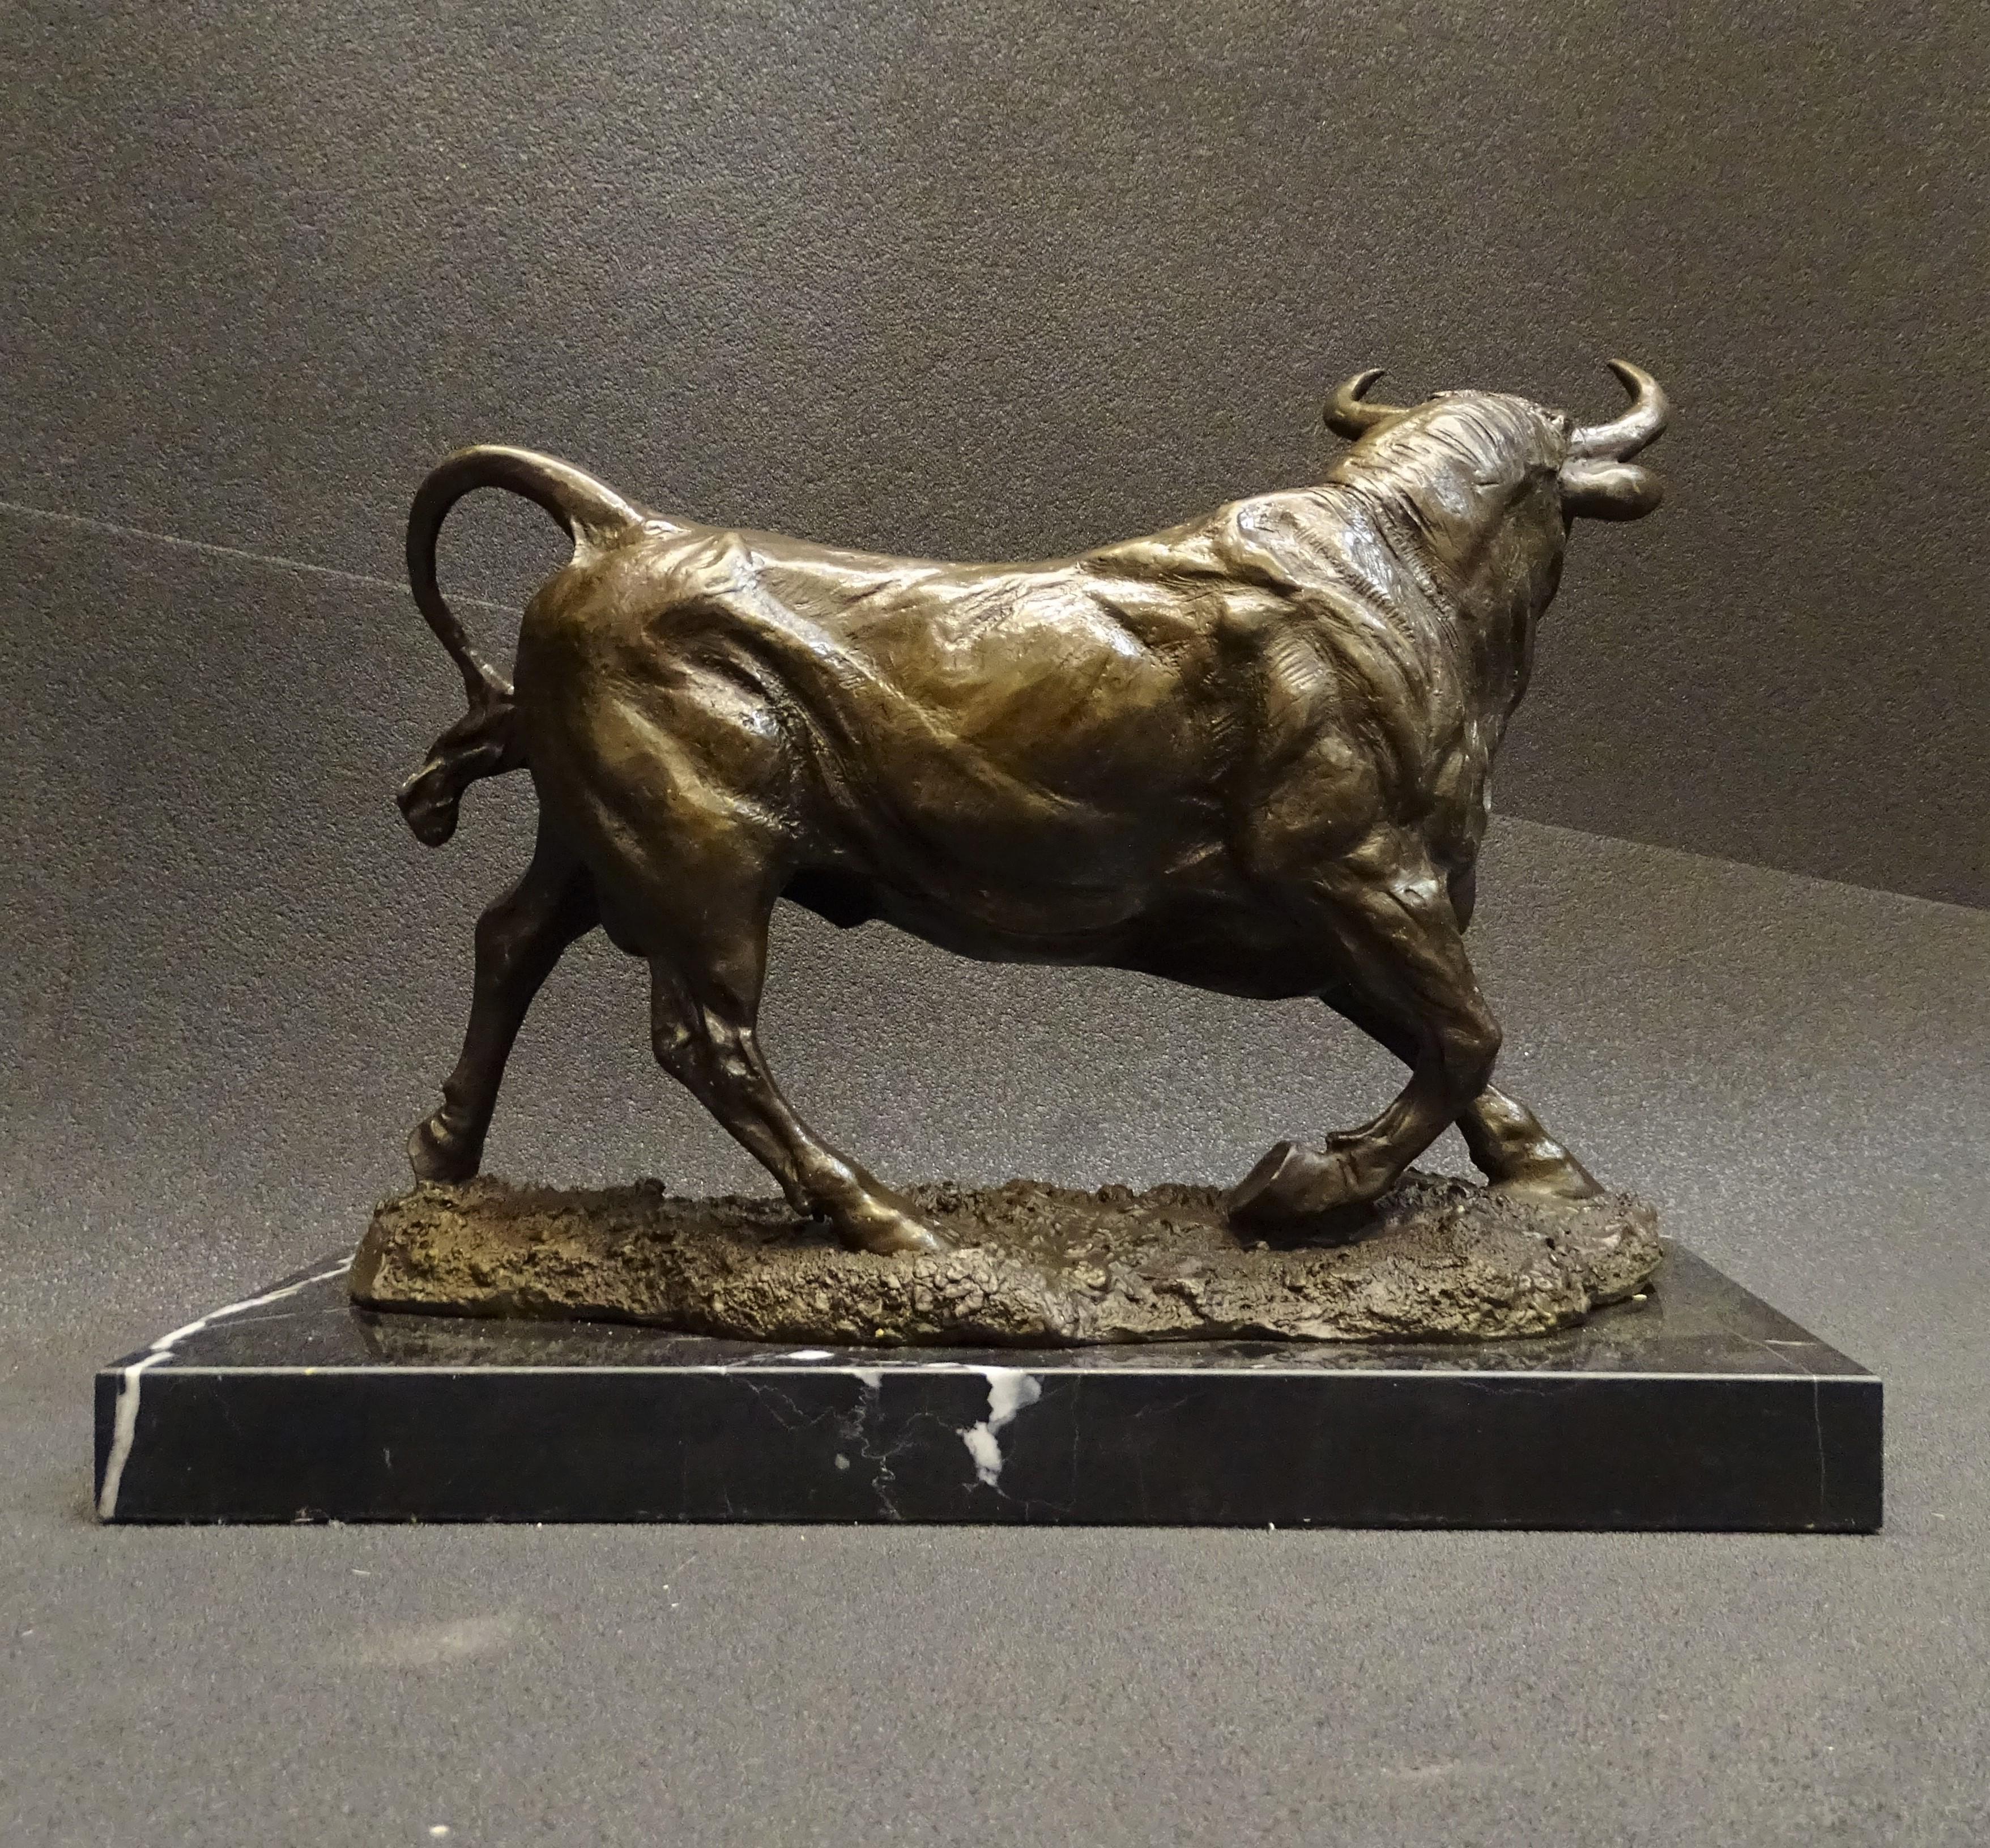 Amazing bull bronze sculpture by the recognised French sculptor of realistic romanticism Antoine - Louis Barye. It,s signed

The son of a goldsmith, in his father's workshop he acquired a taste for detail. He was also a disciple of François Joseph